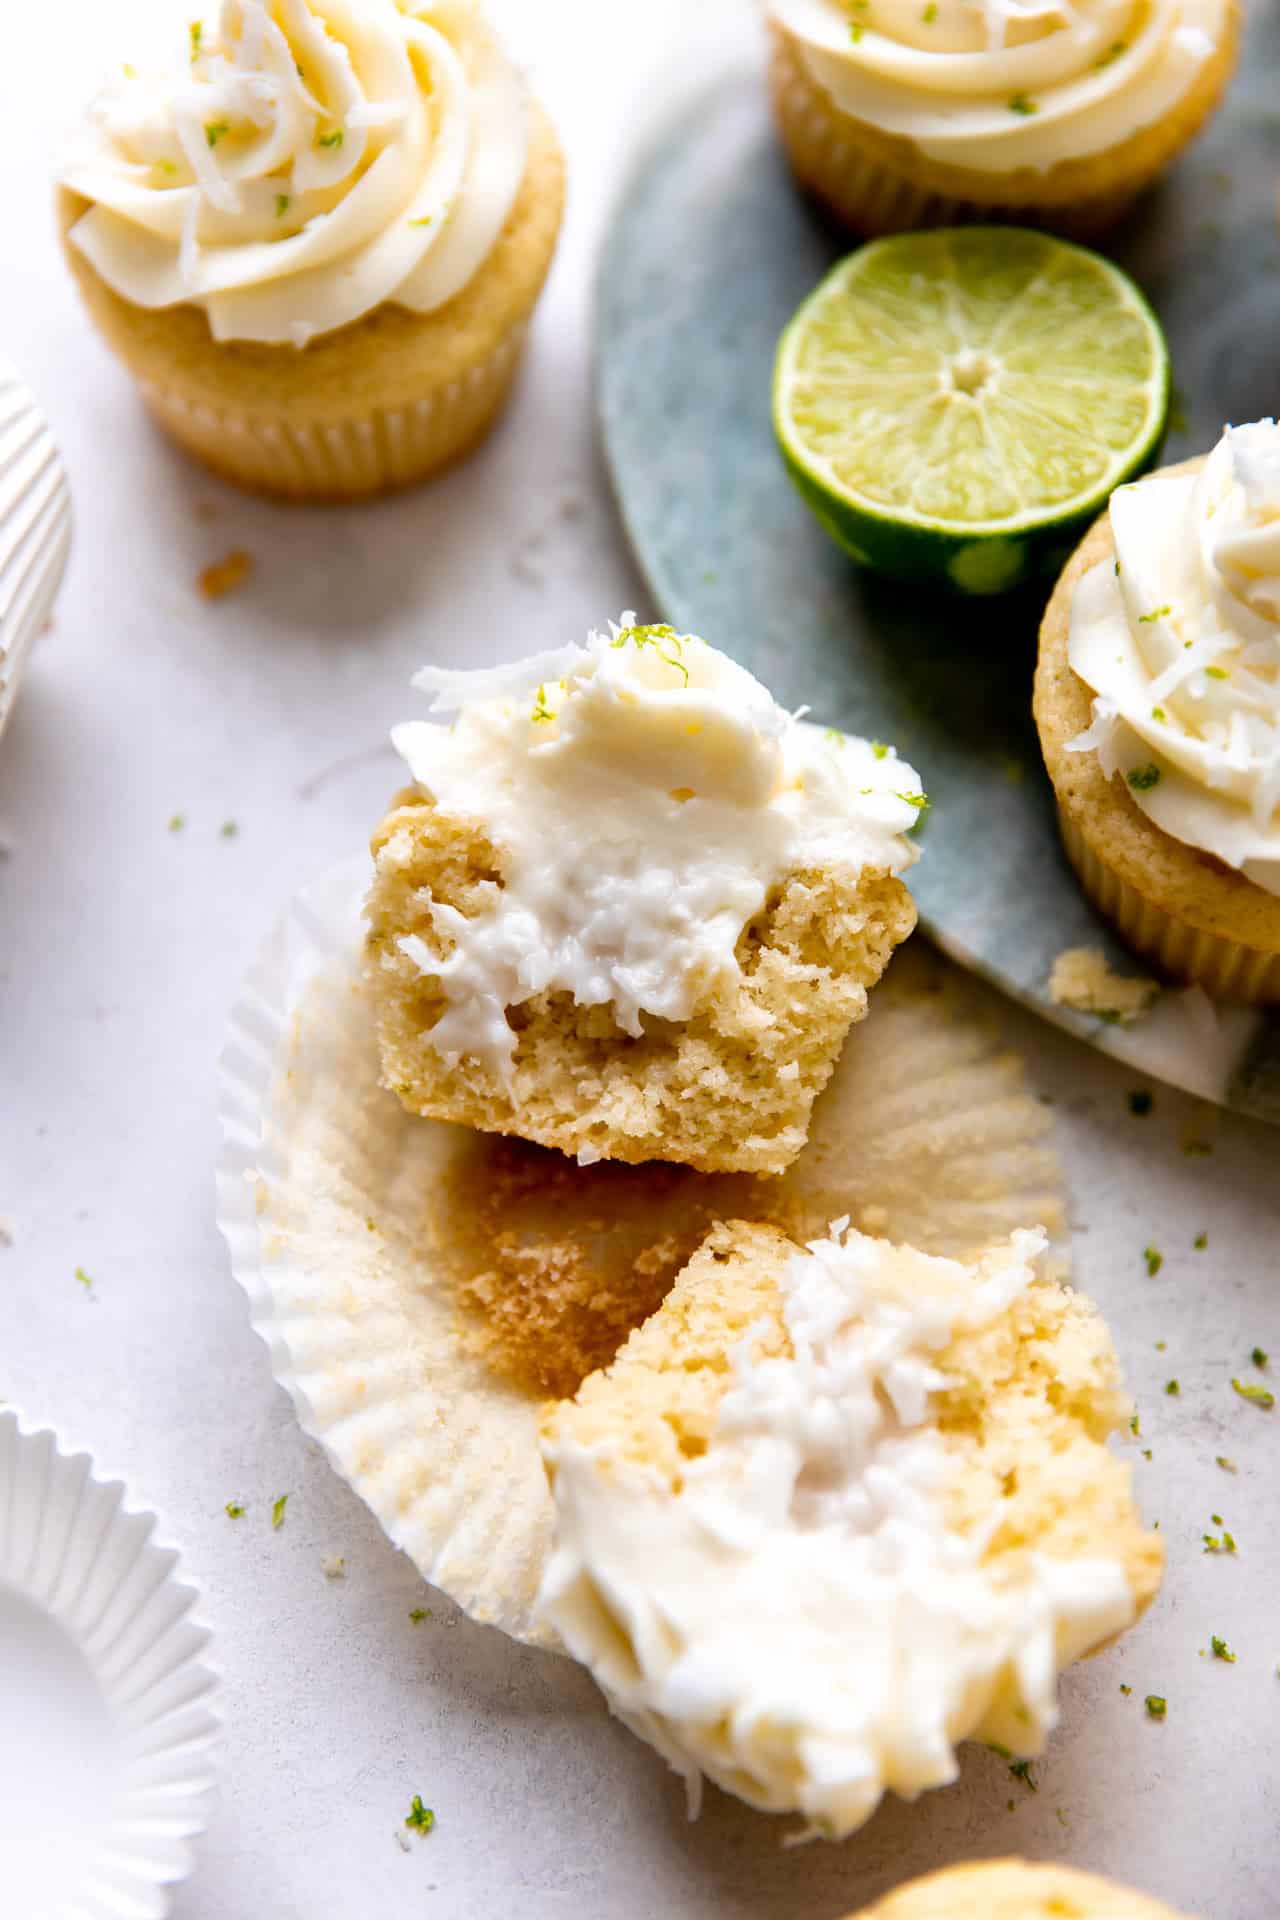 Sliced open coconut lime cupcake showing creamy coconut filling in the middle.